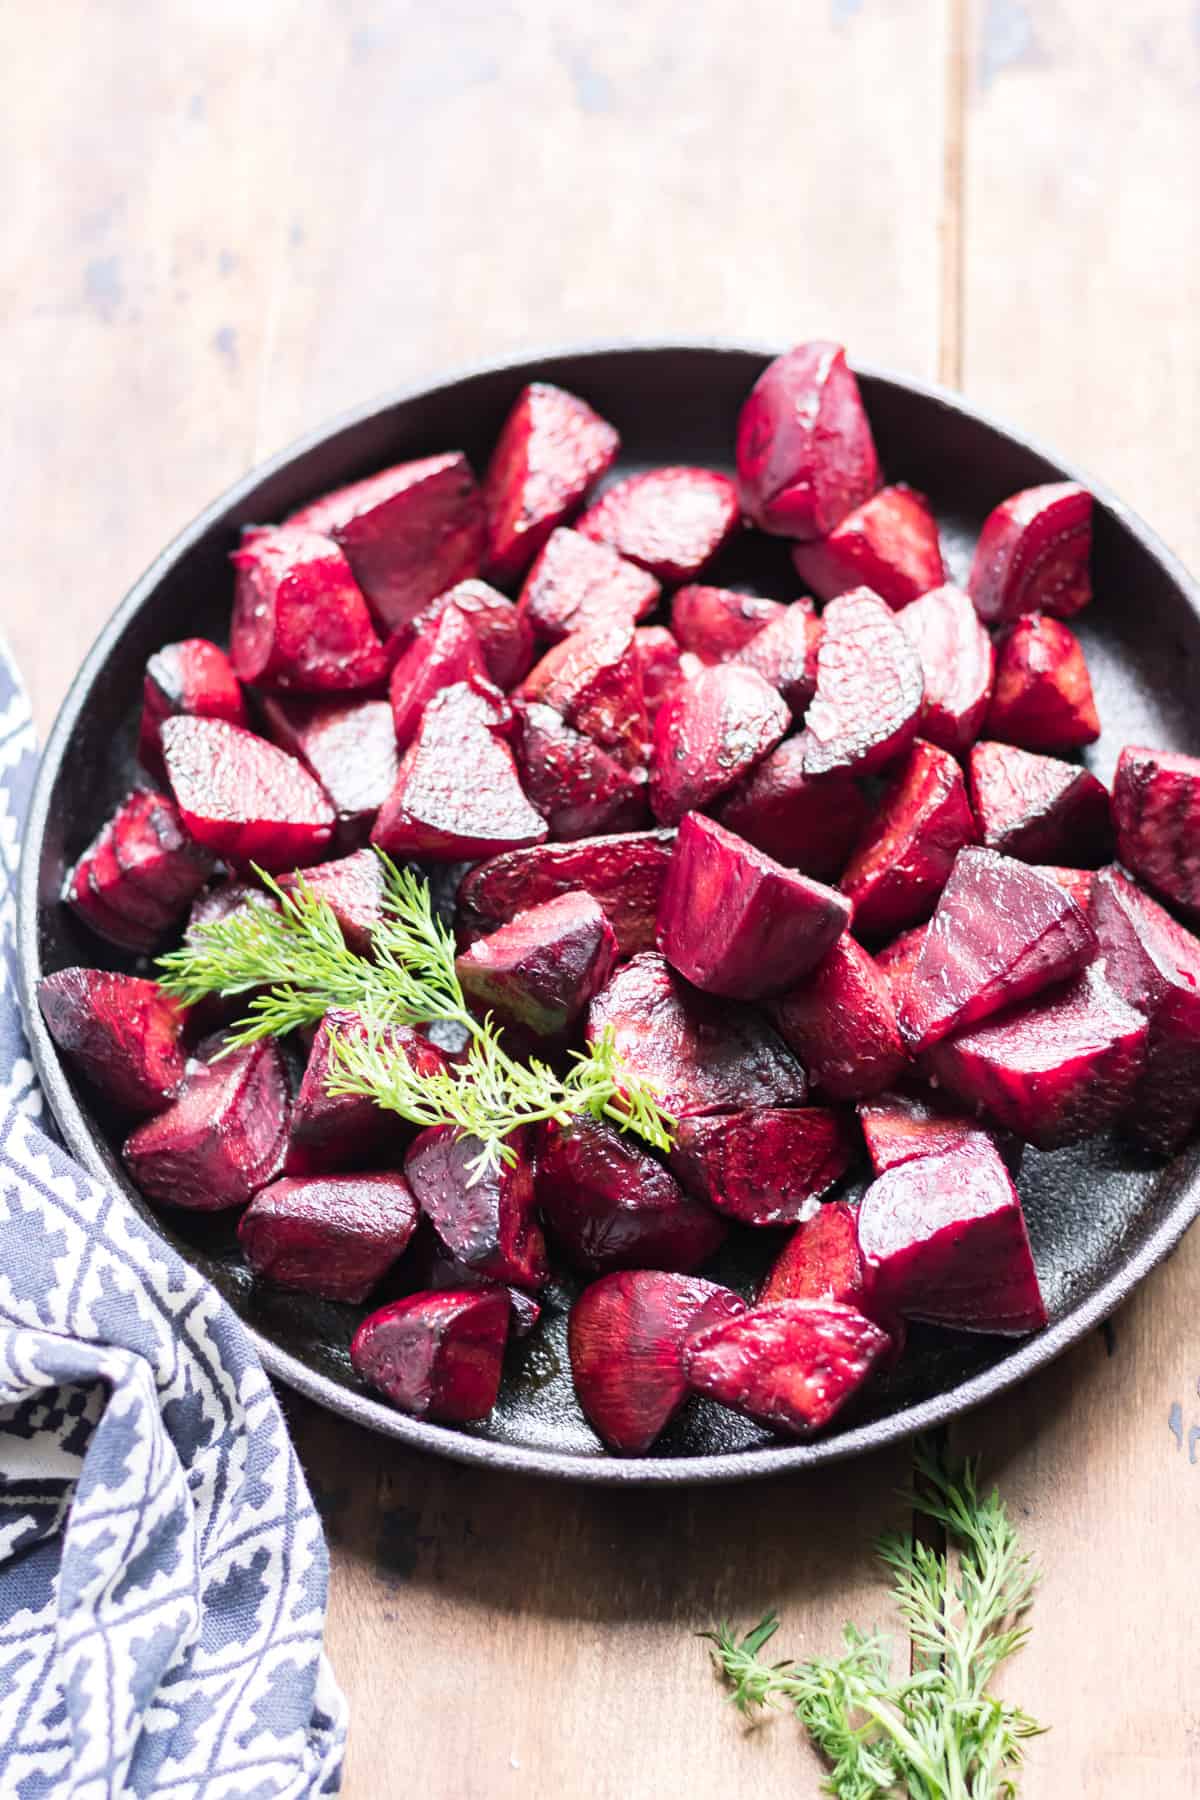 Dish of beets, with a sprig of dill.